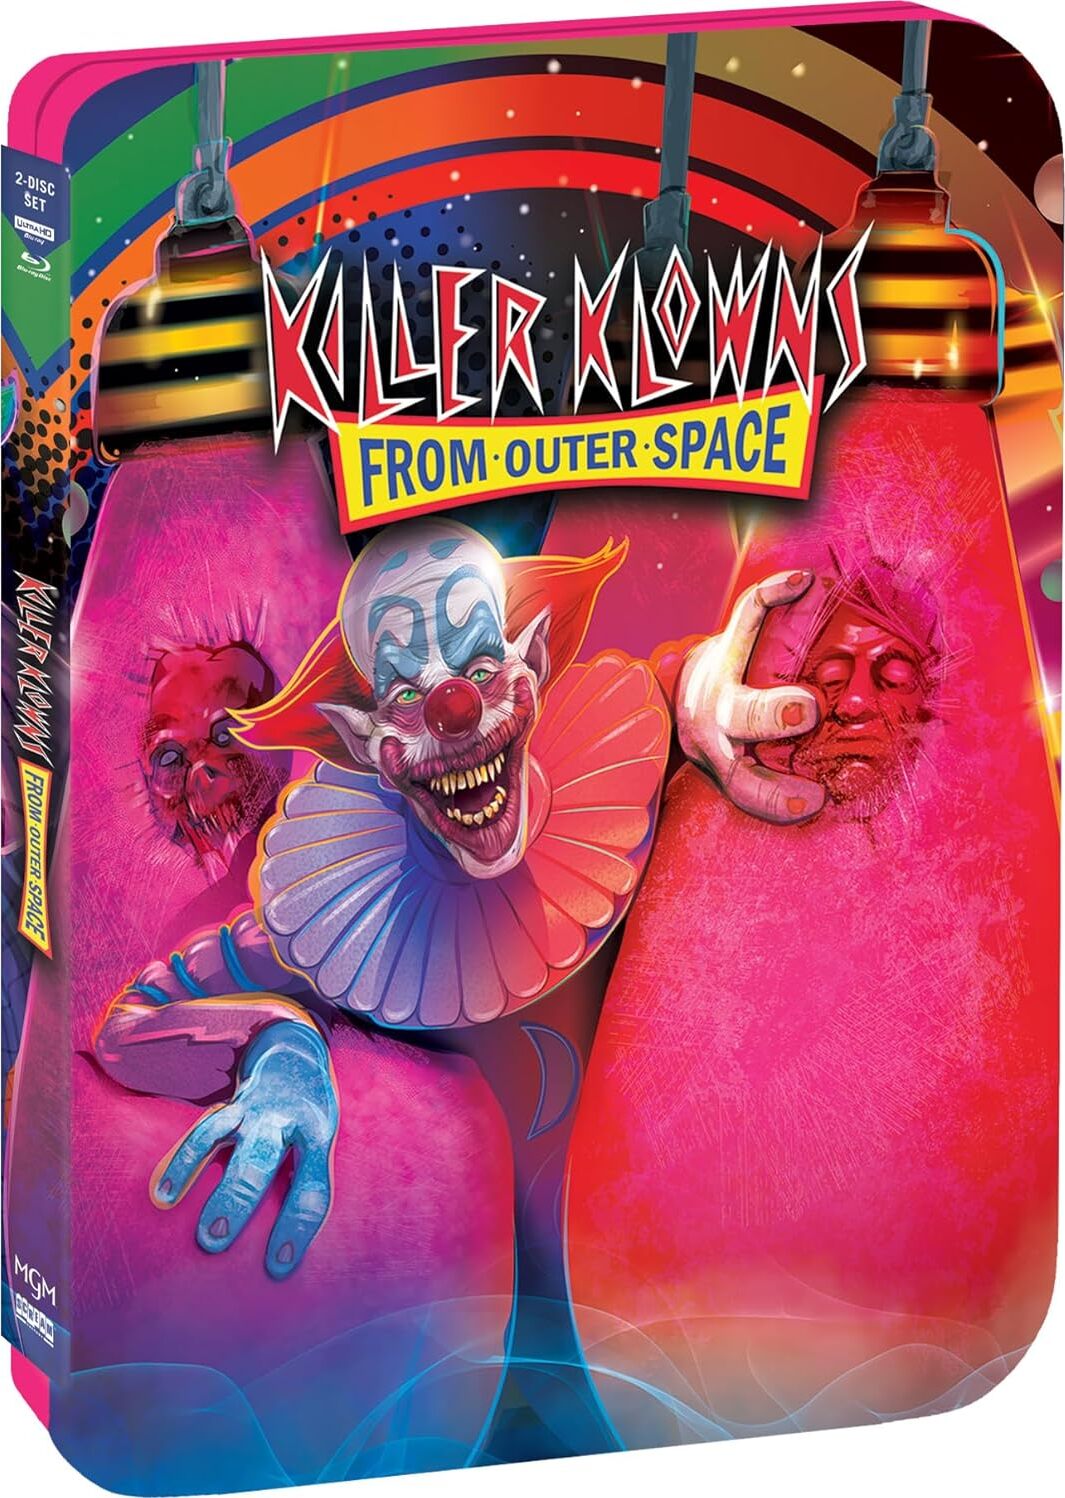 Killer Klowns from Outer Space [Steelbook] [4K UHD] [US]